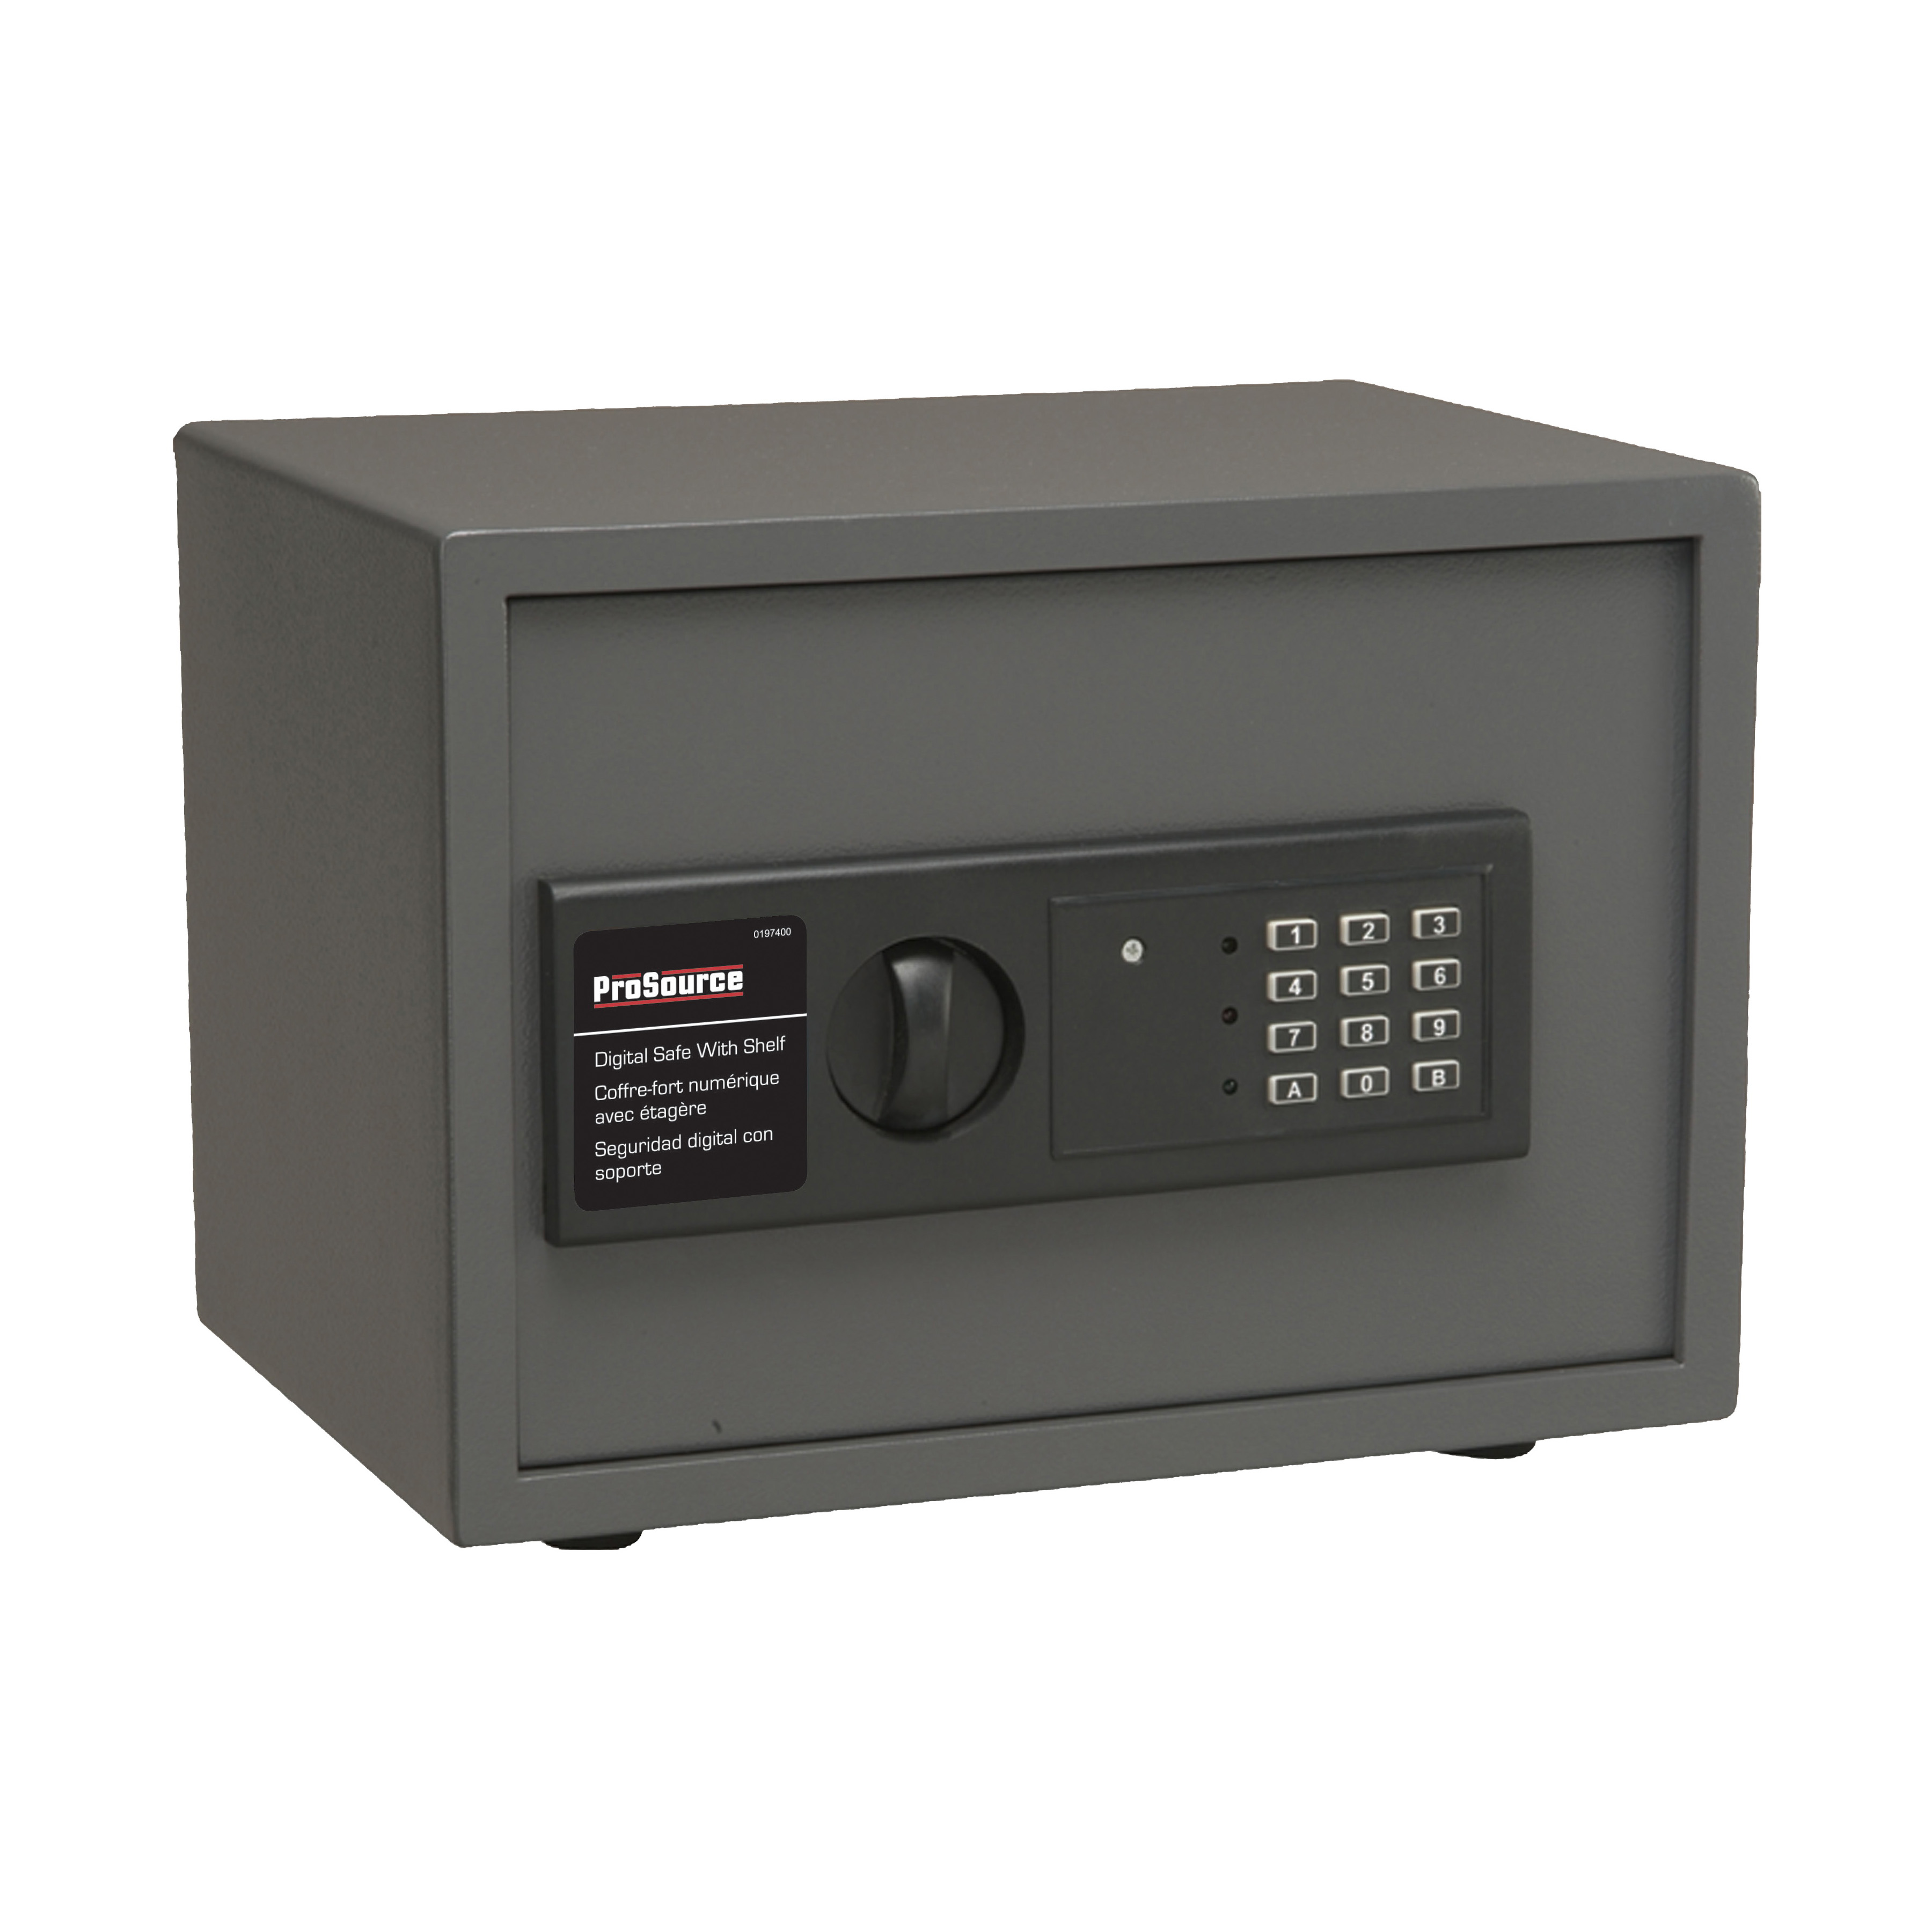 S-30ES Digital Electronic Safe, 15 in W x 11-13/16 in D x 11-13/16 in H Exterior, Solid Steel, Powder-Coated